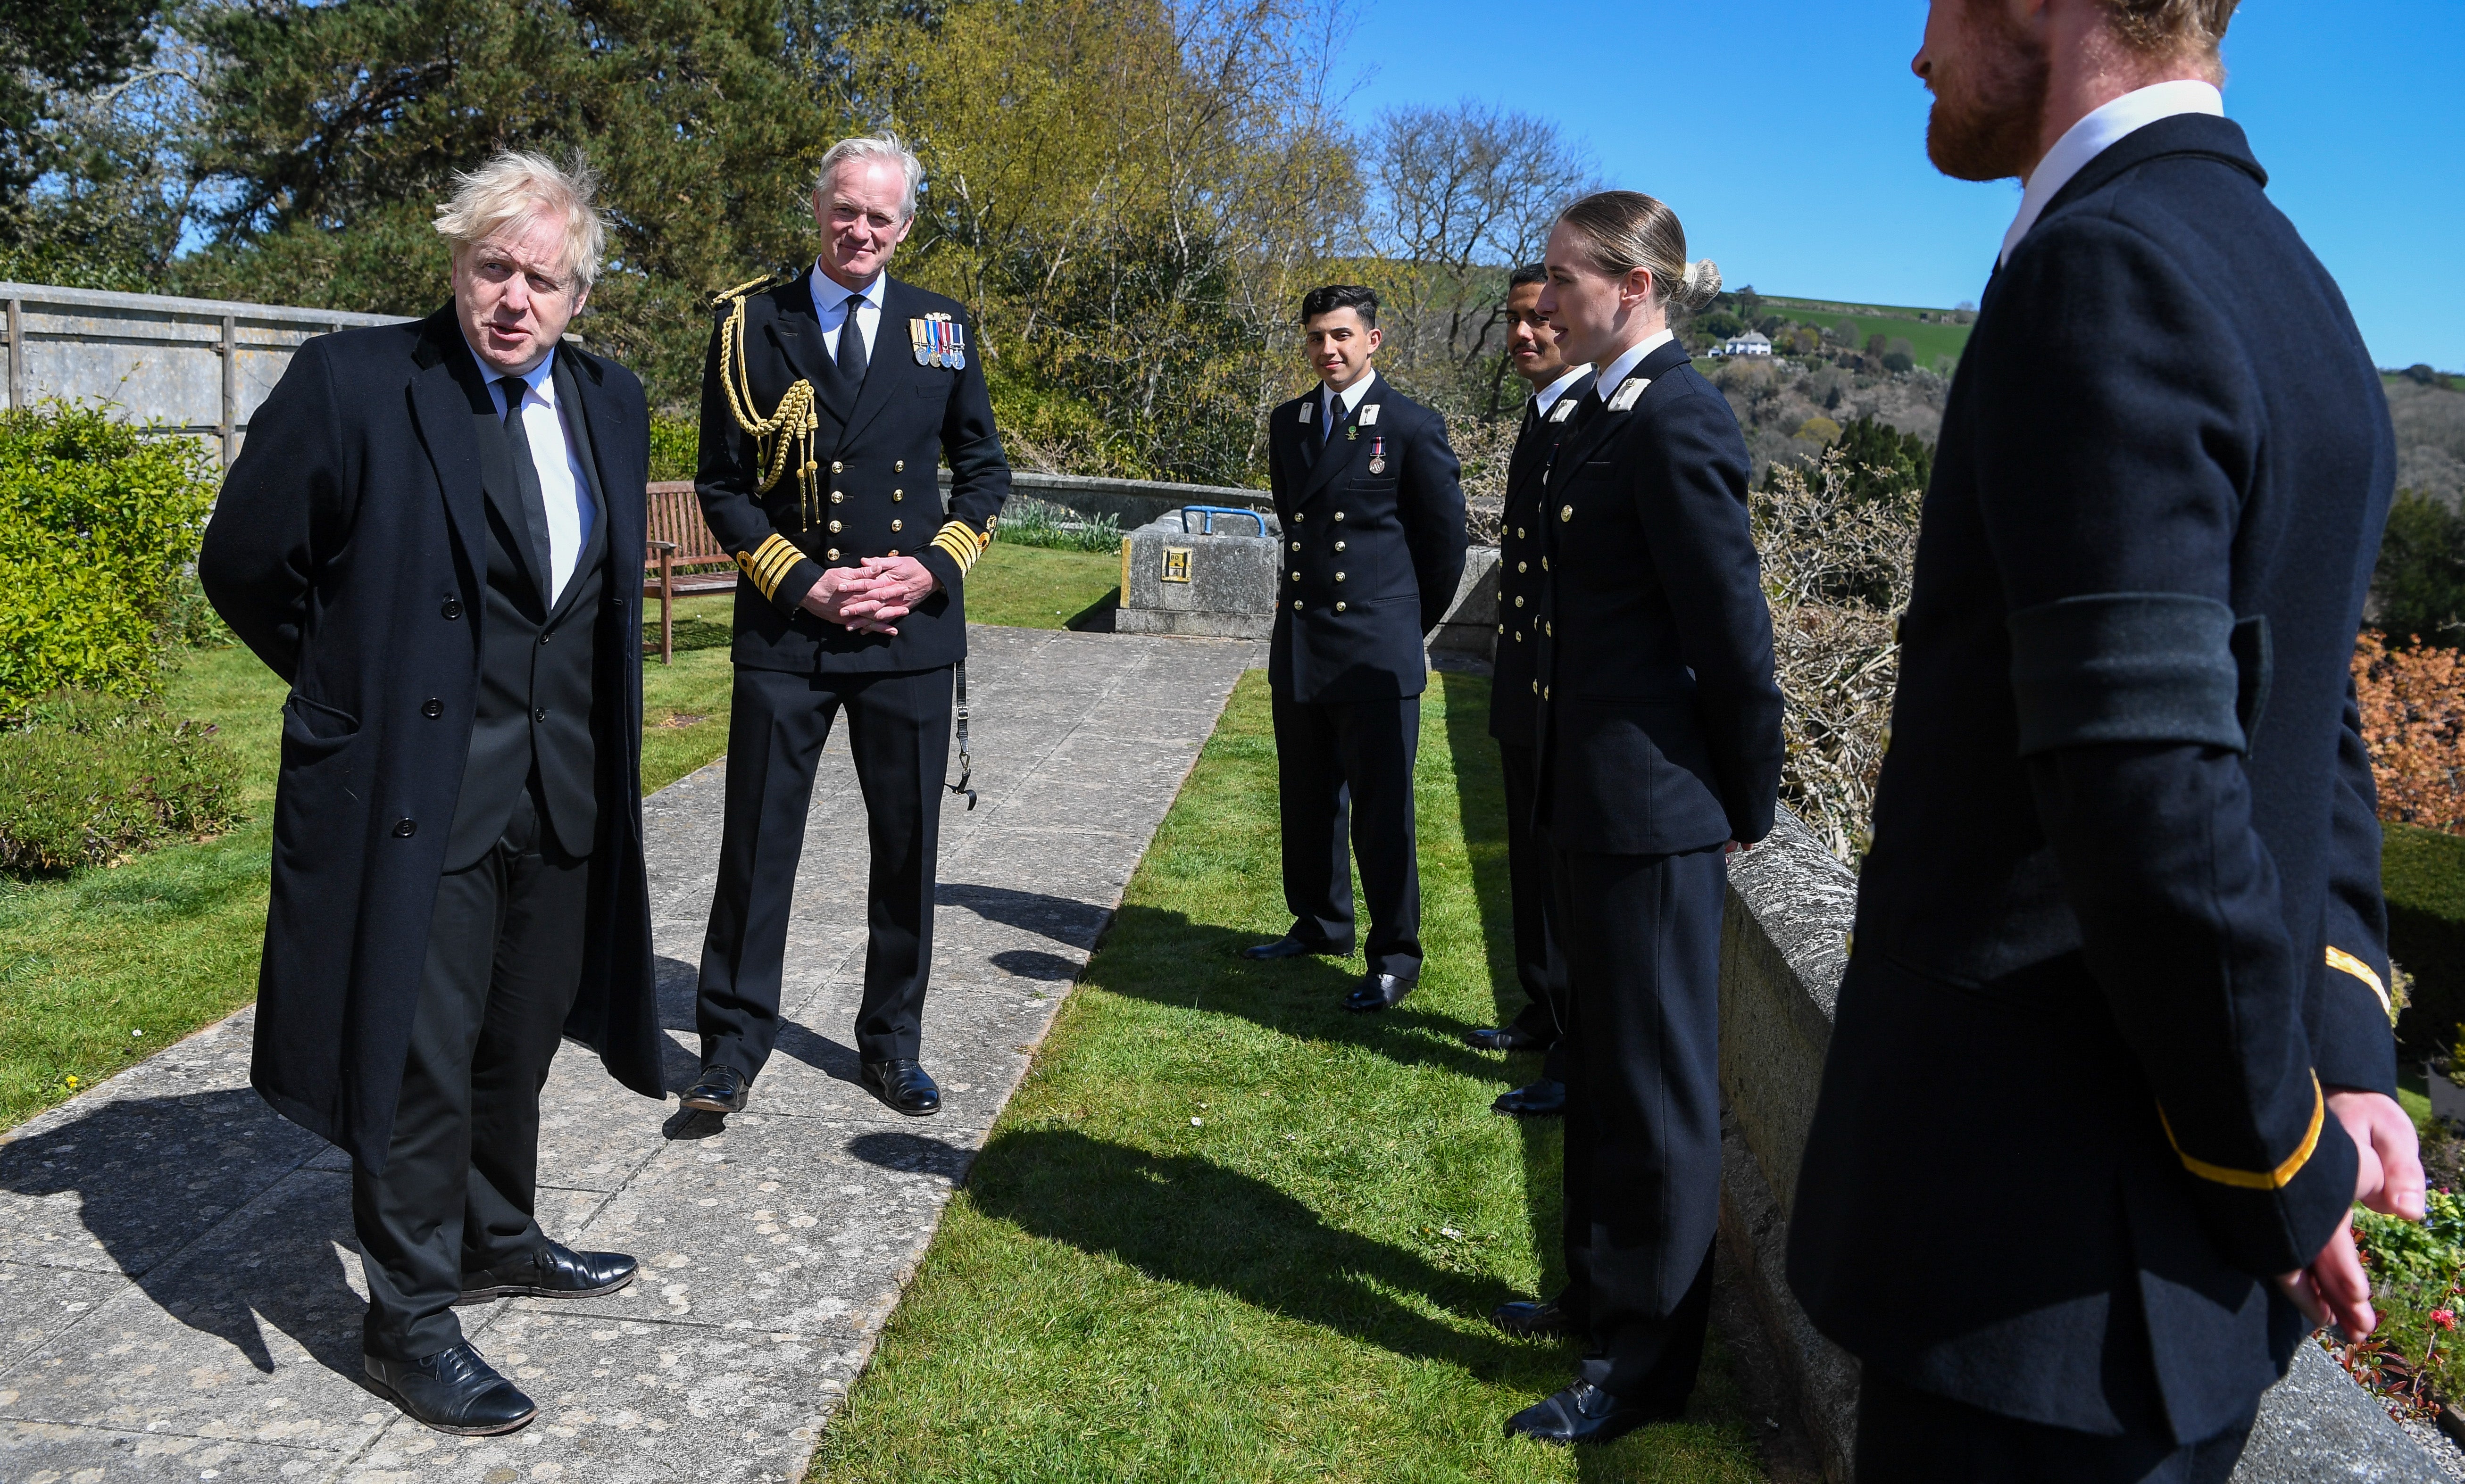 Prime Minister Boris Johnson meets cadets with Captain Roger Readwin after the Passing-out parade at Britannia Royal Naval College during his visit in commemoration of HRH The Prince Philip